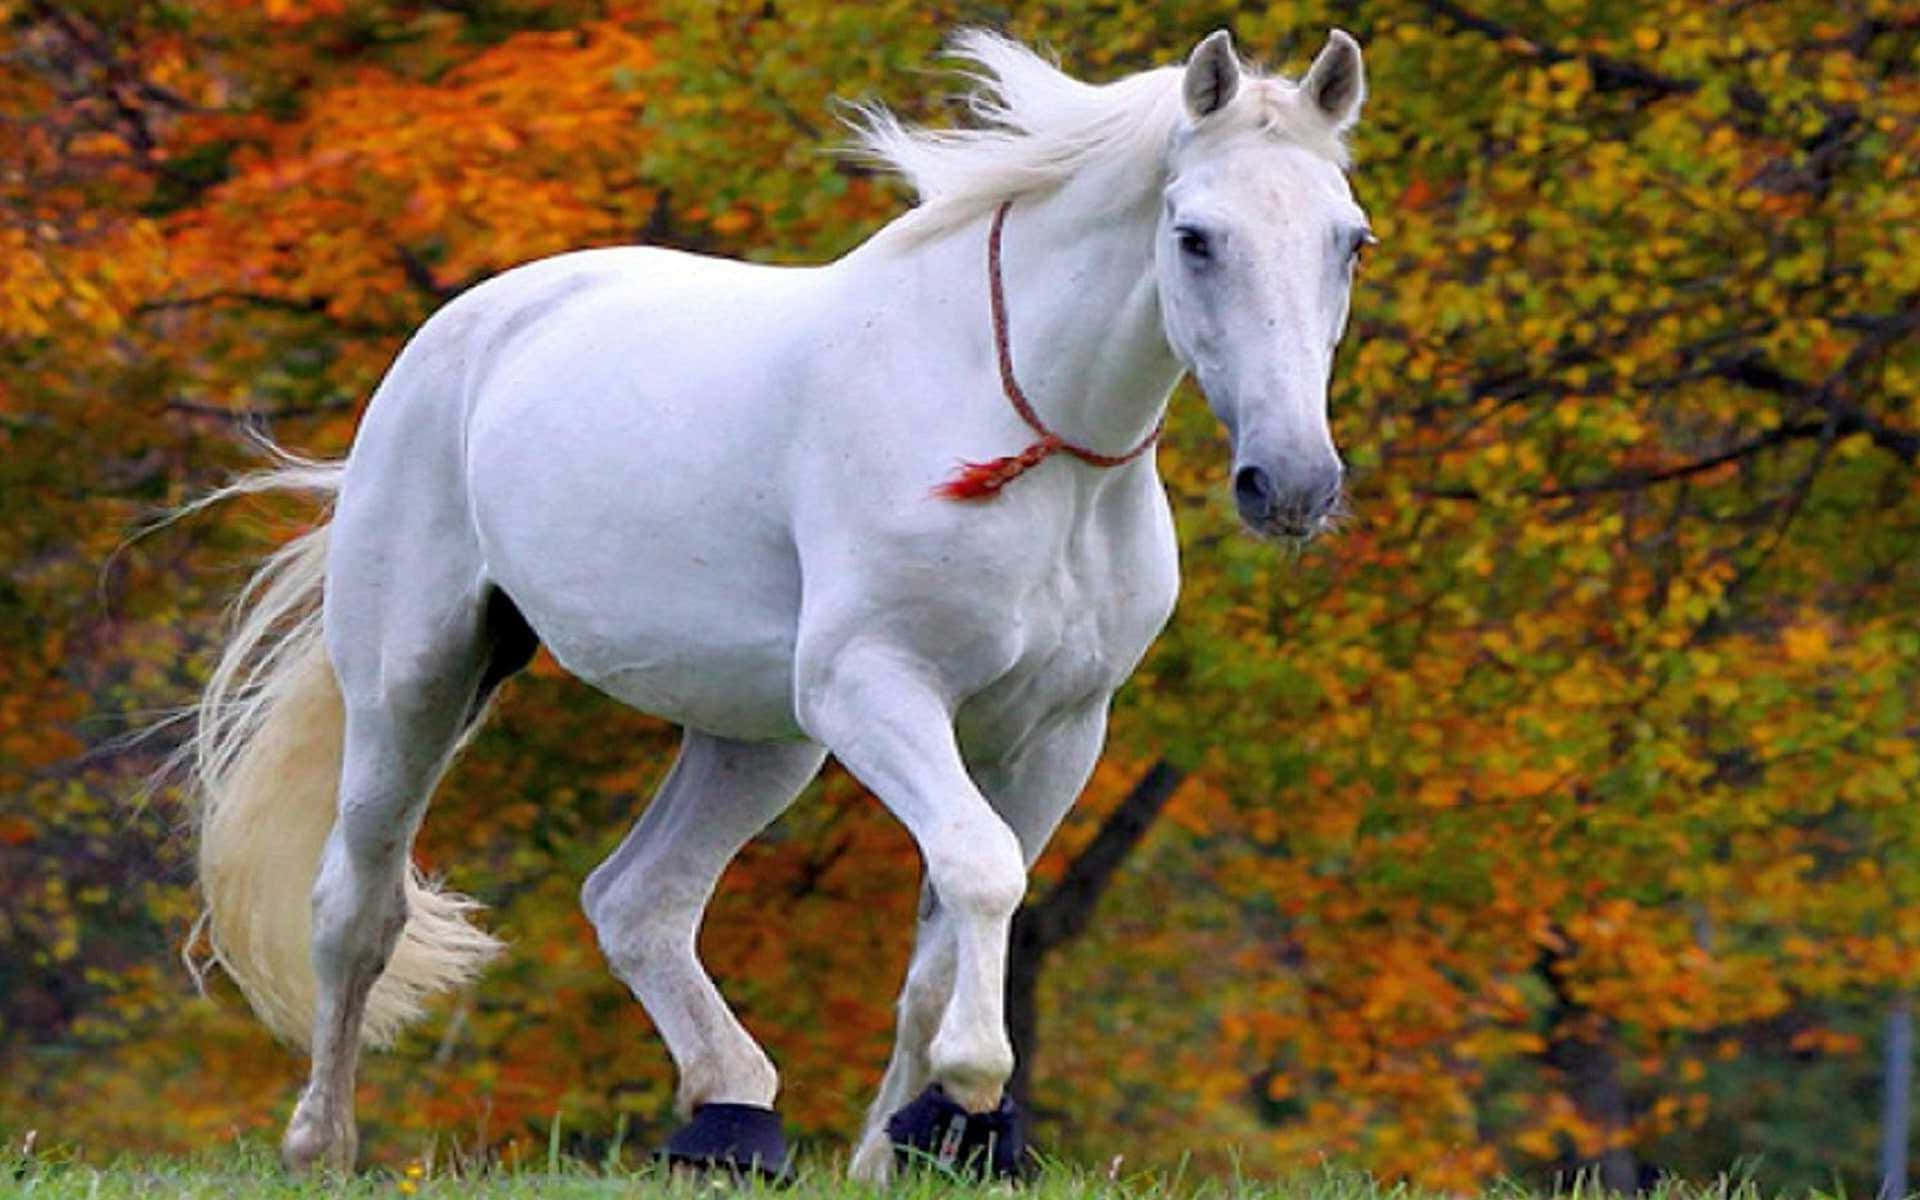 “The Stunning Beauty of Horse".